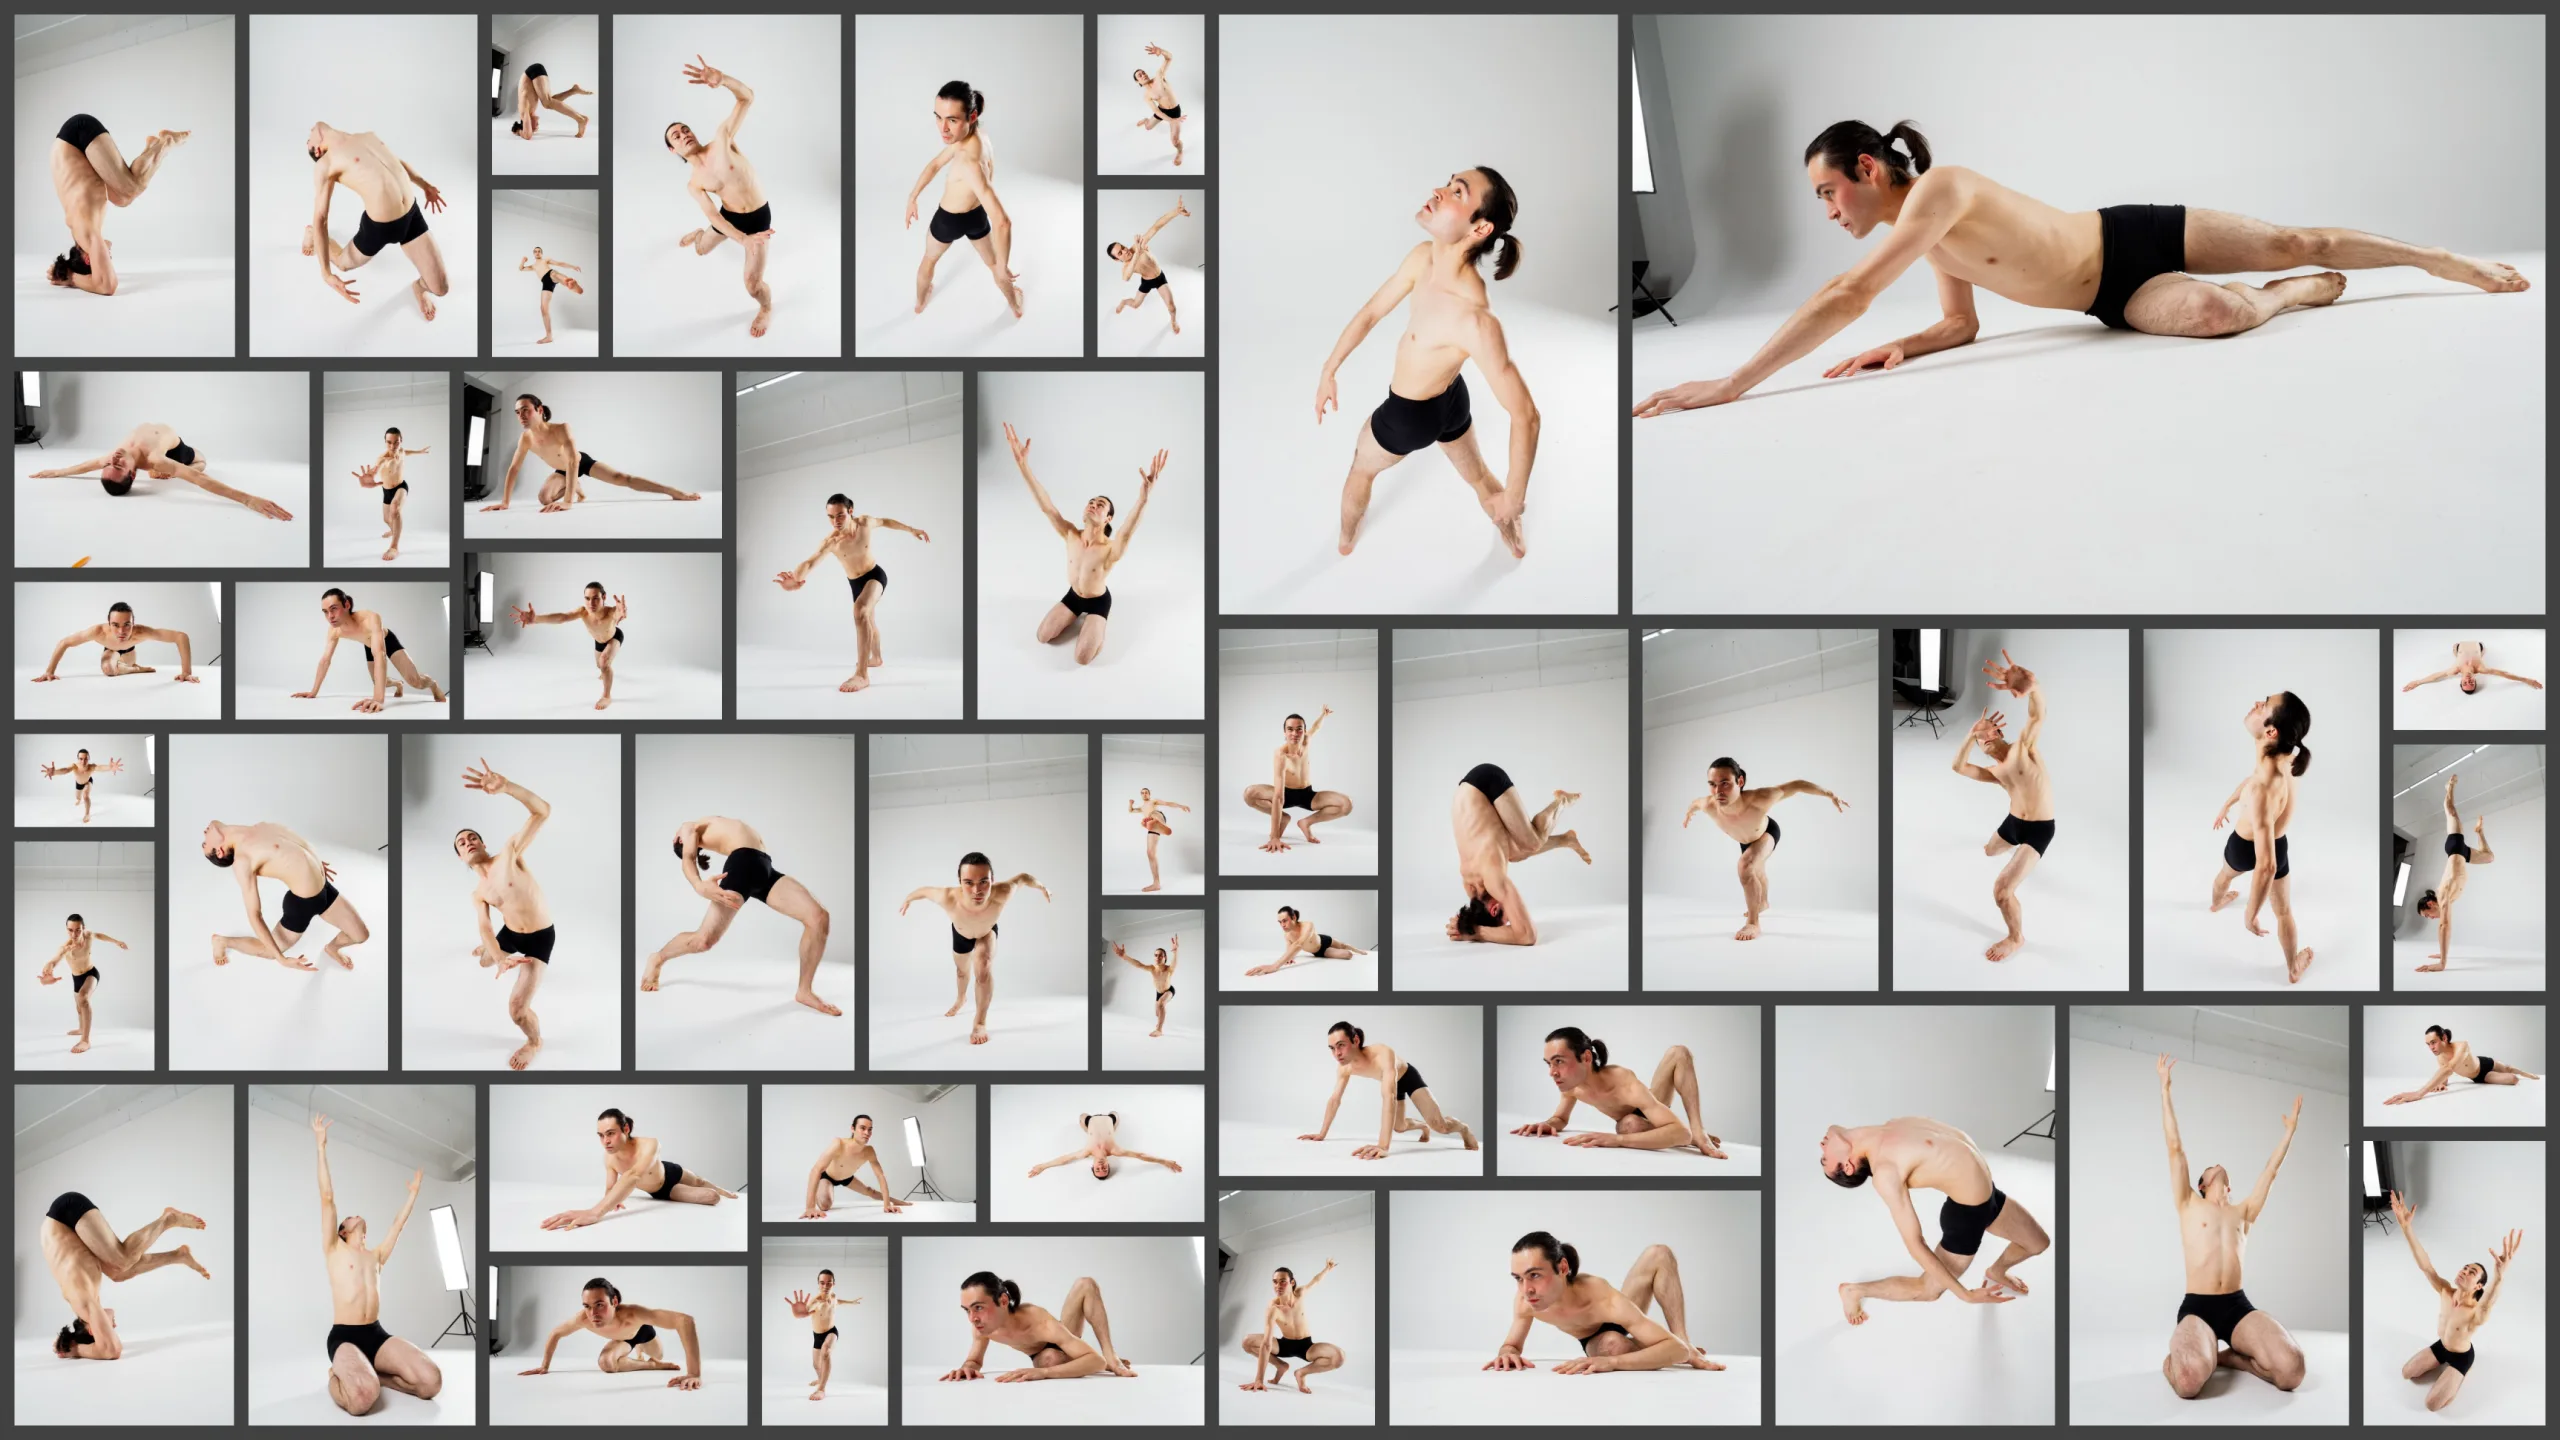 250+ Dynamic Male Wide-Angle Poses - Reference Image